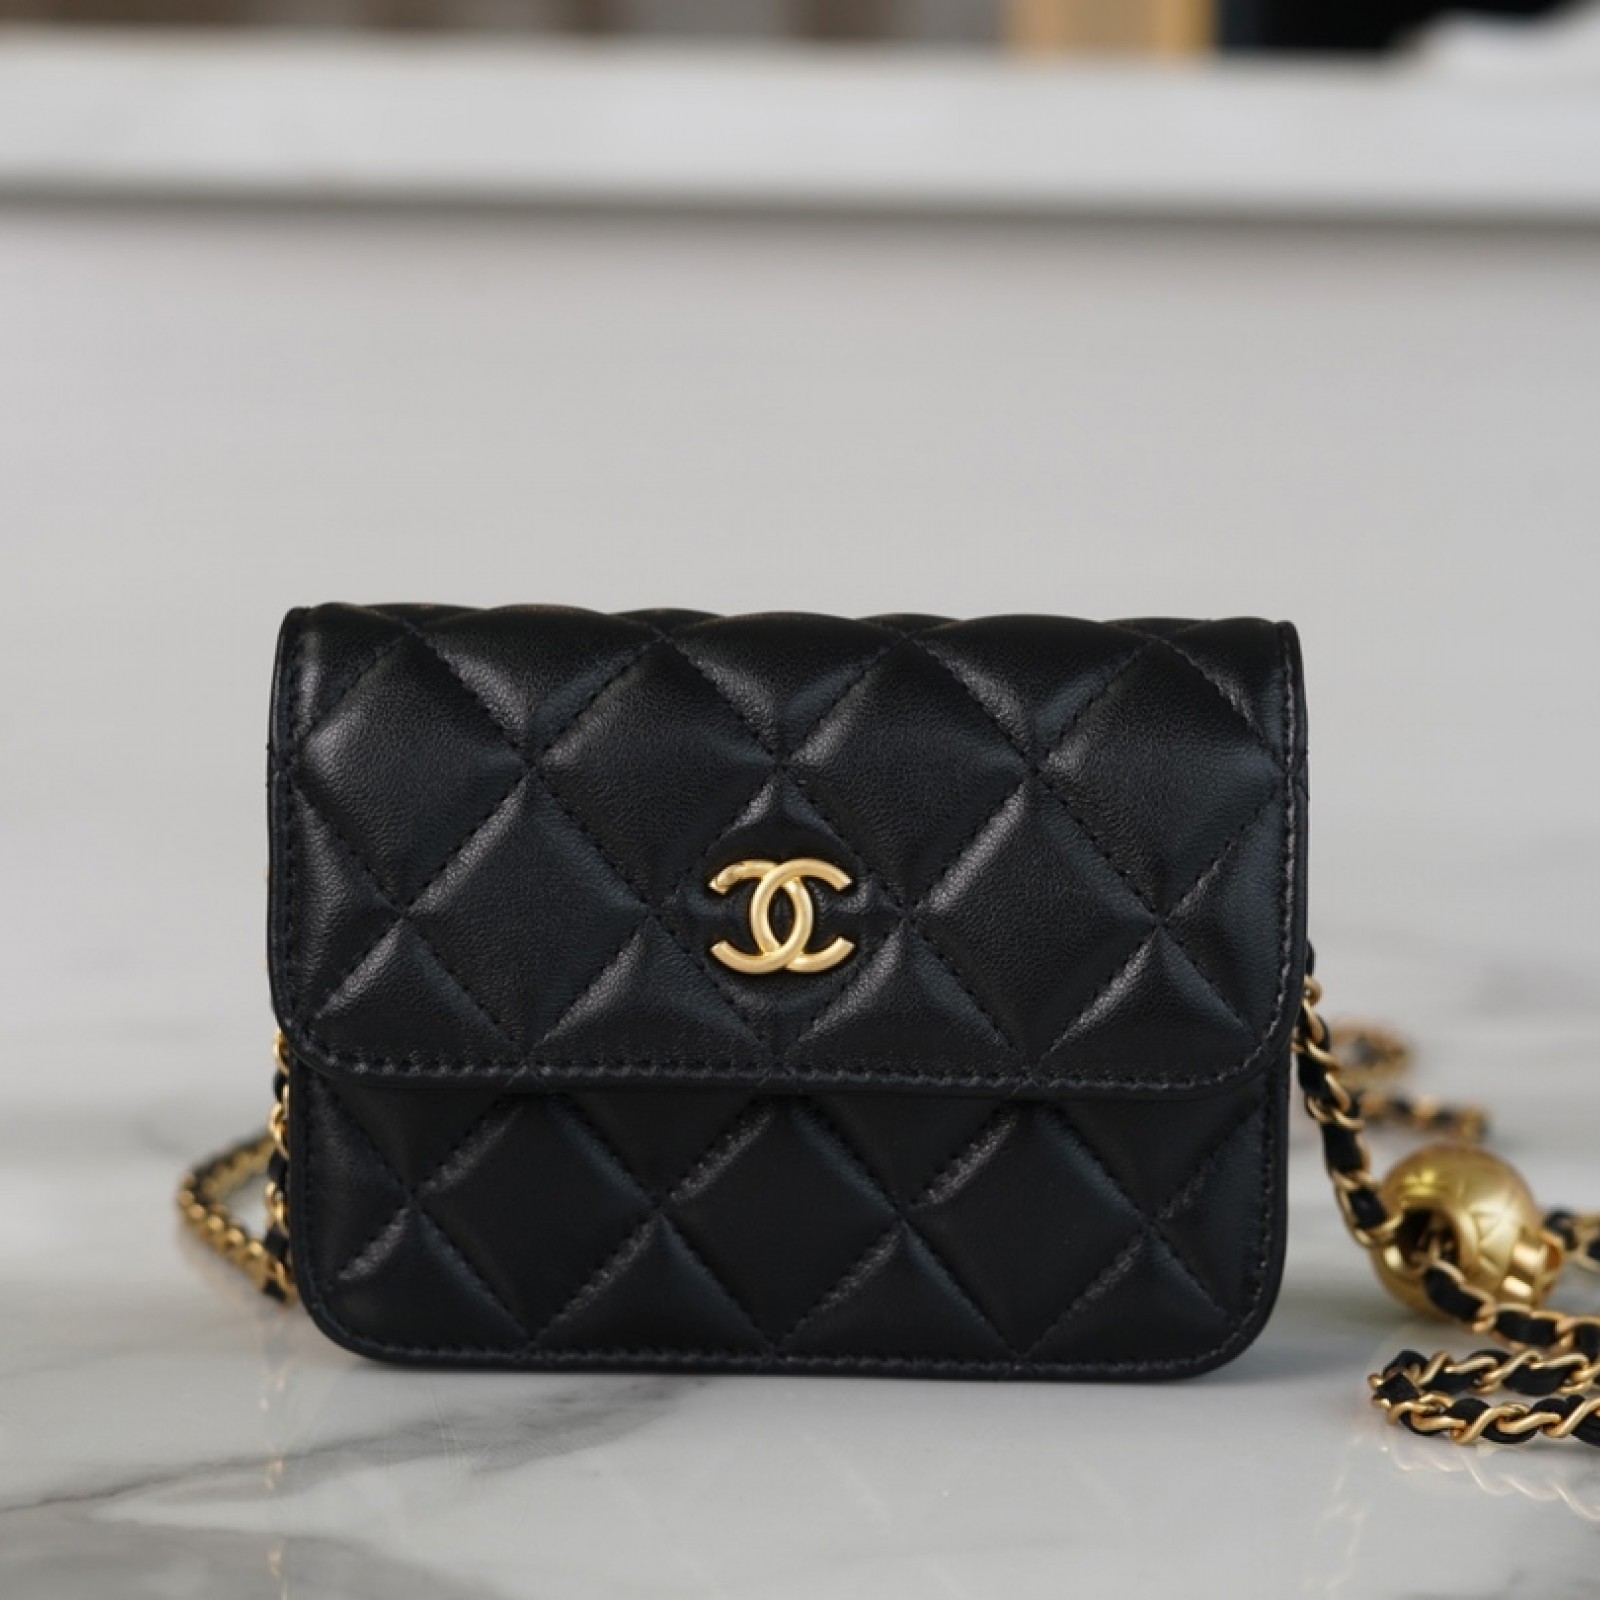 CHANEL PEARL CRUSH CLUTCH WITH CHAIN BAG